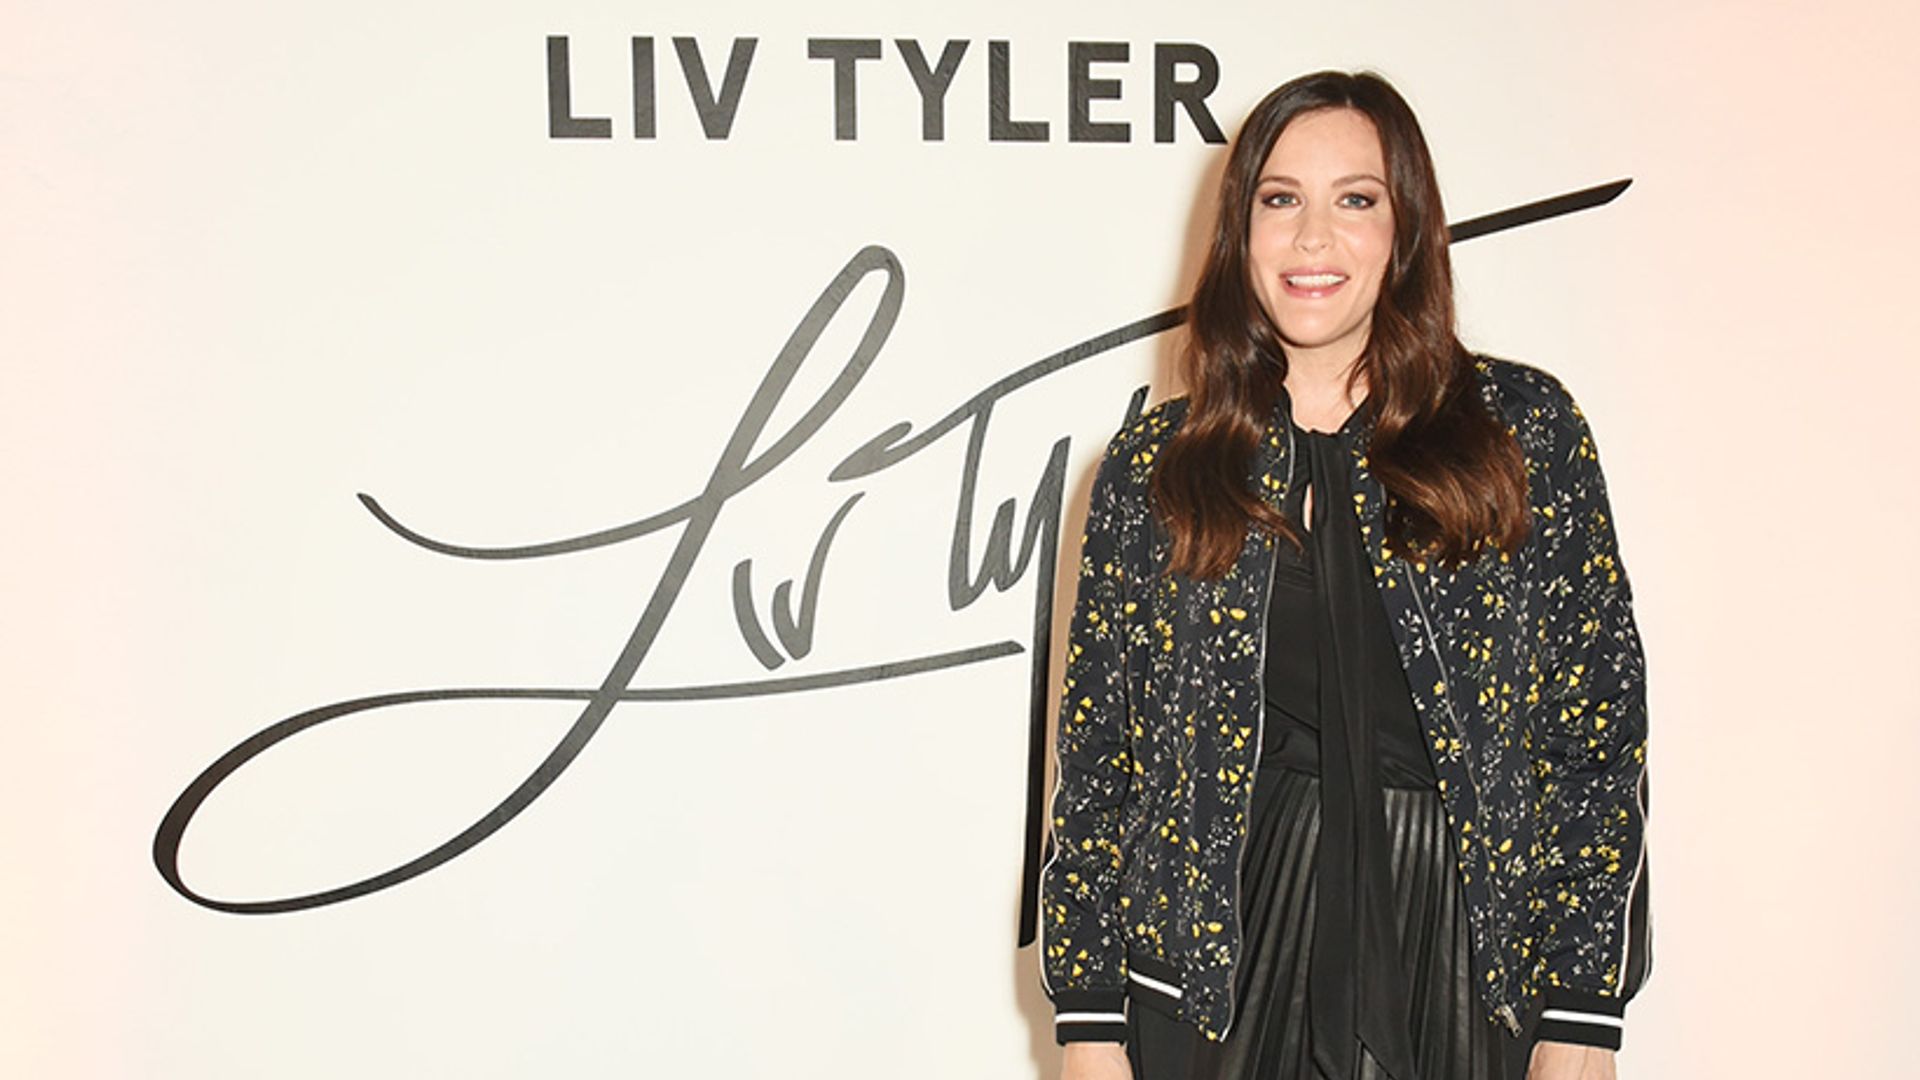 Exclusive interview: Liv Tyler talks being mum to Lula Rose: 'It's so nice to buy dresses'